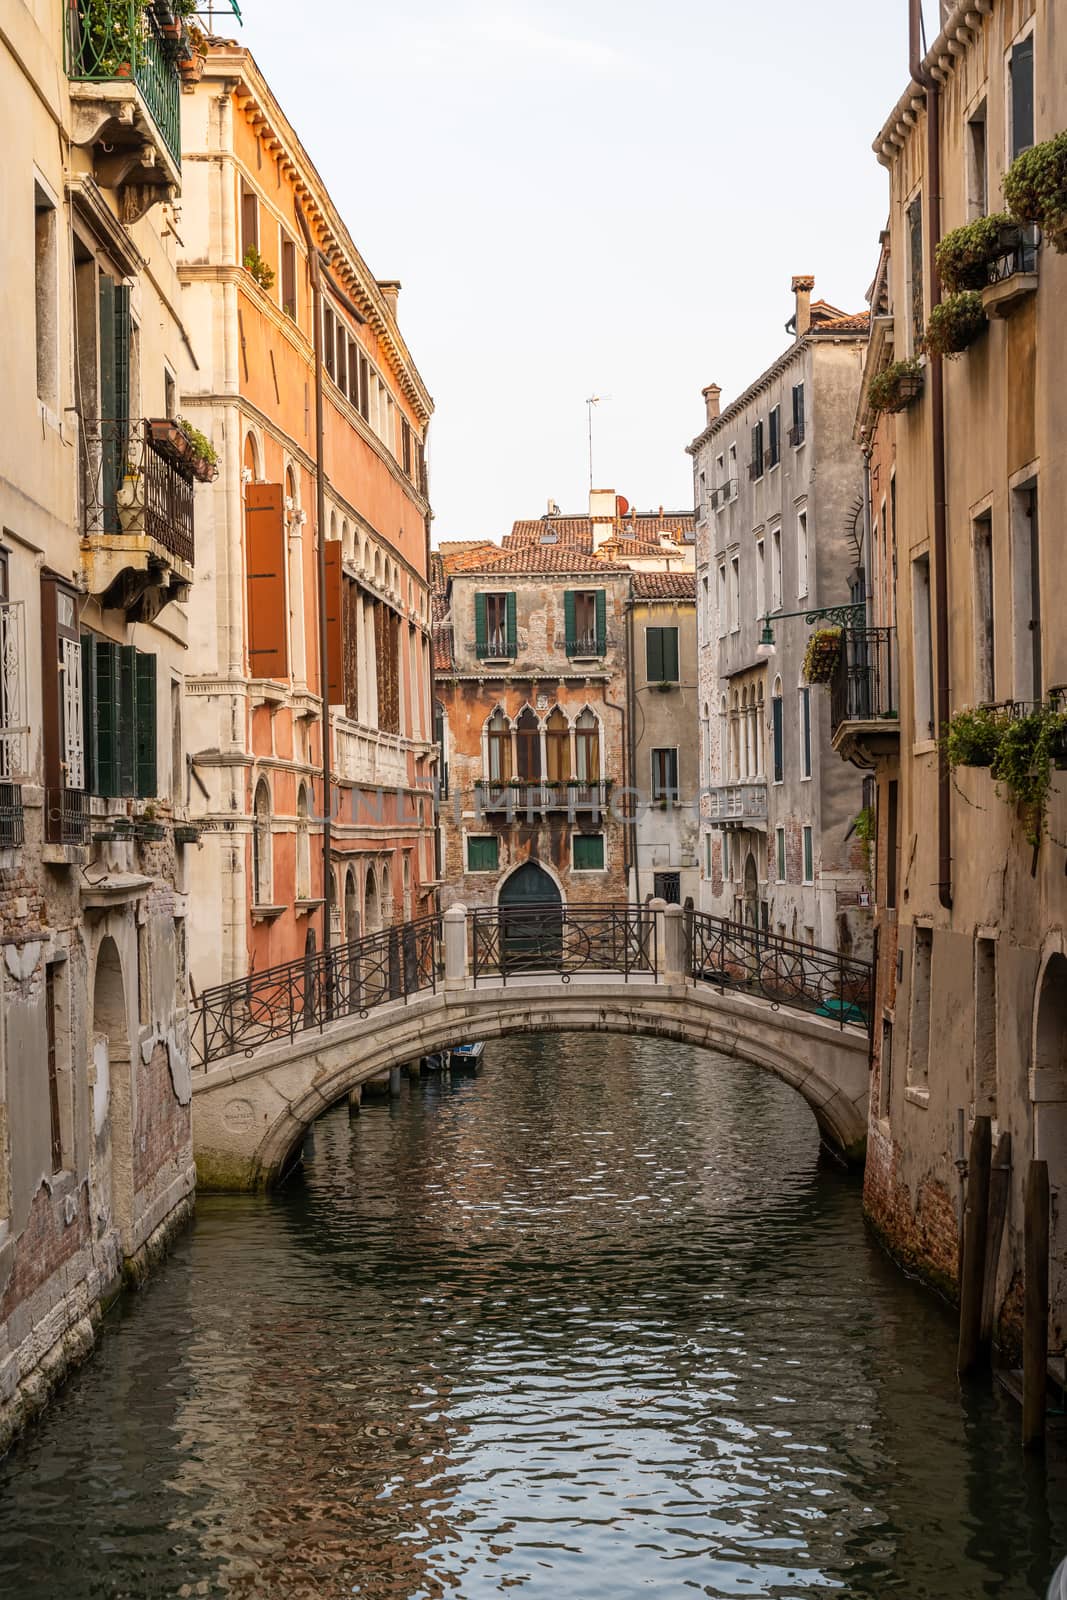 One of the countless beautiful small canals in the old town of Venice, Italy